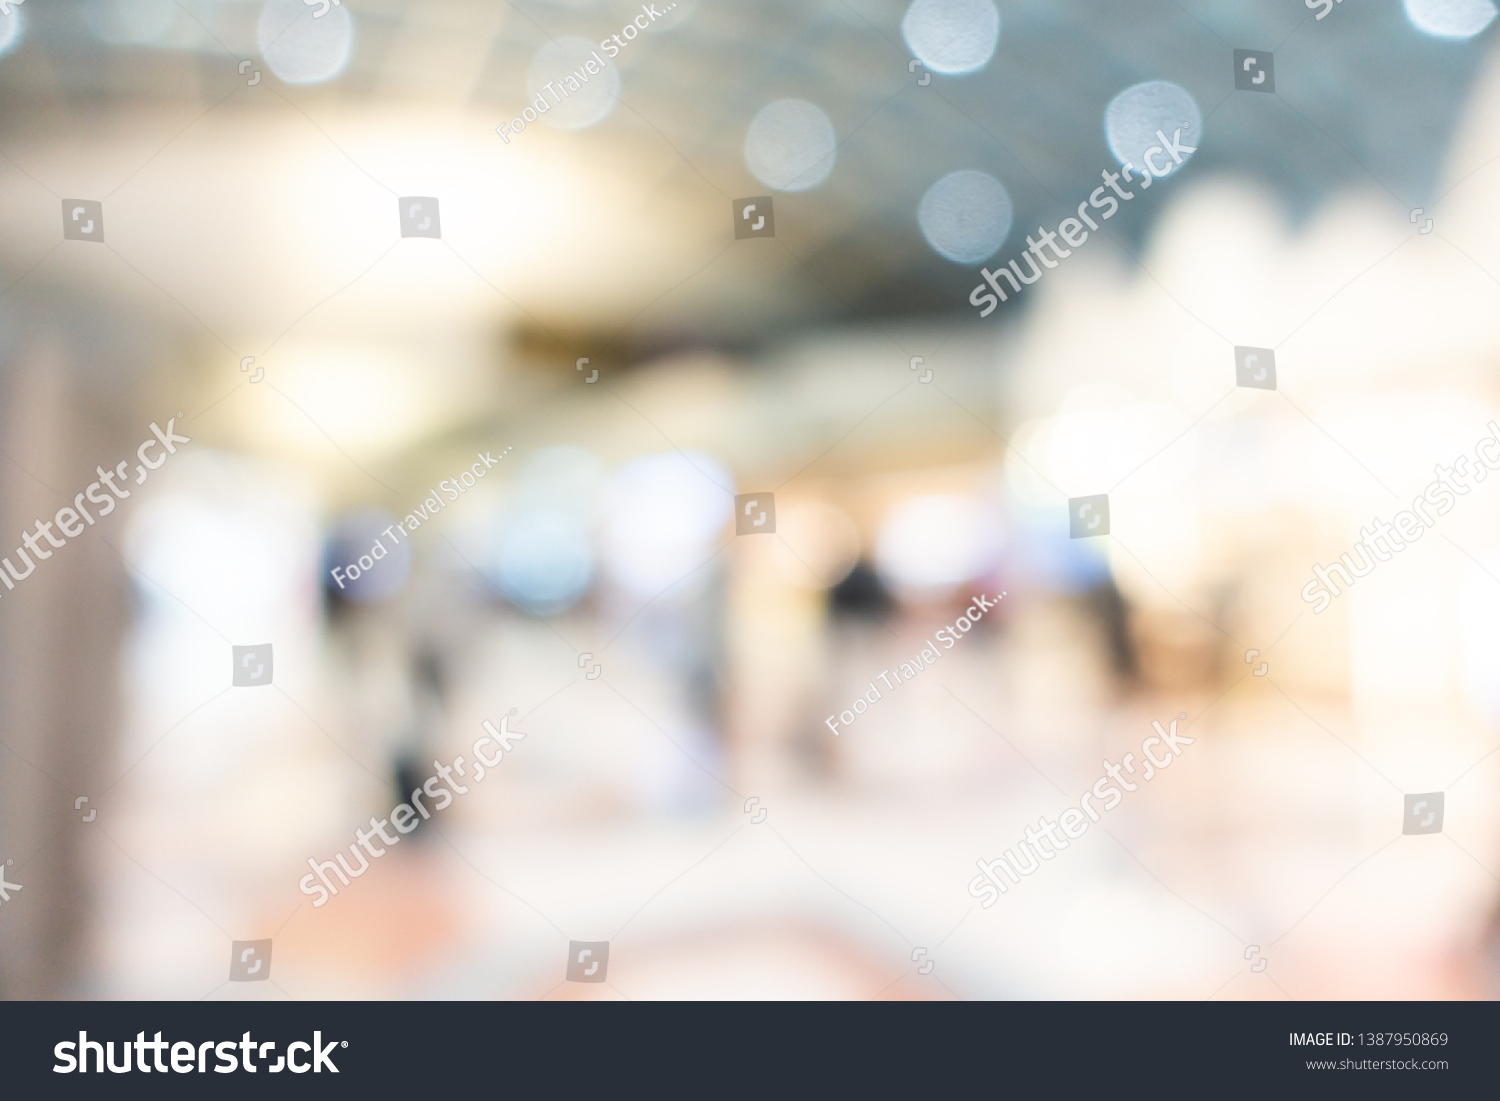 Abstract blur shopping mall interior of department store for background #1387950869